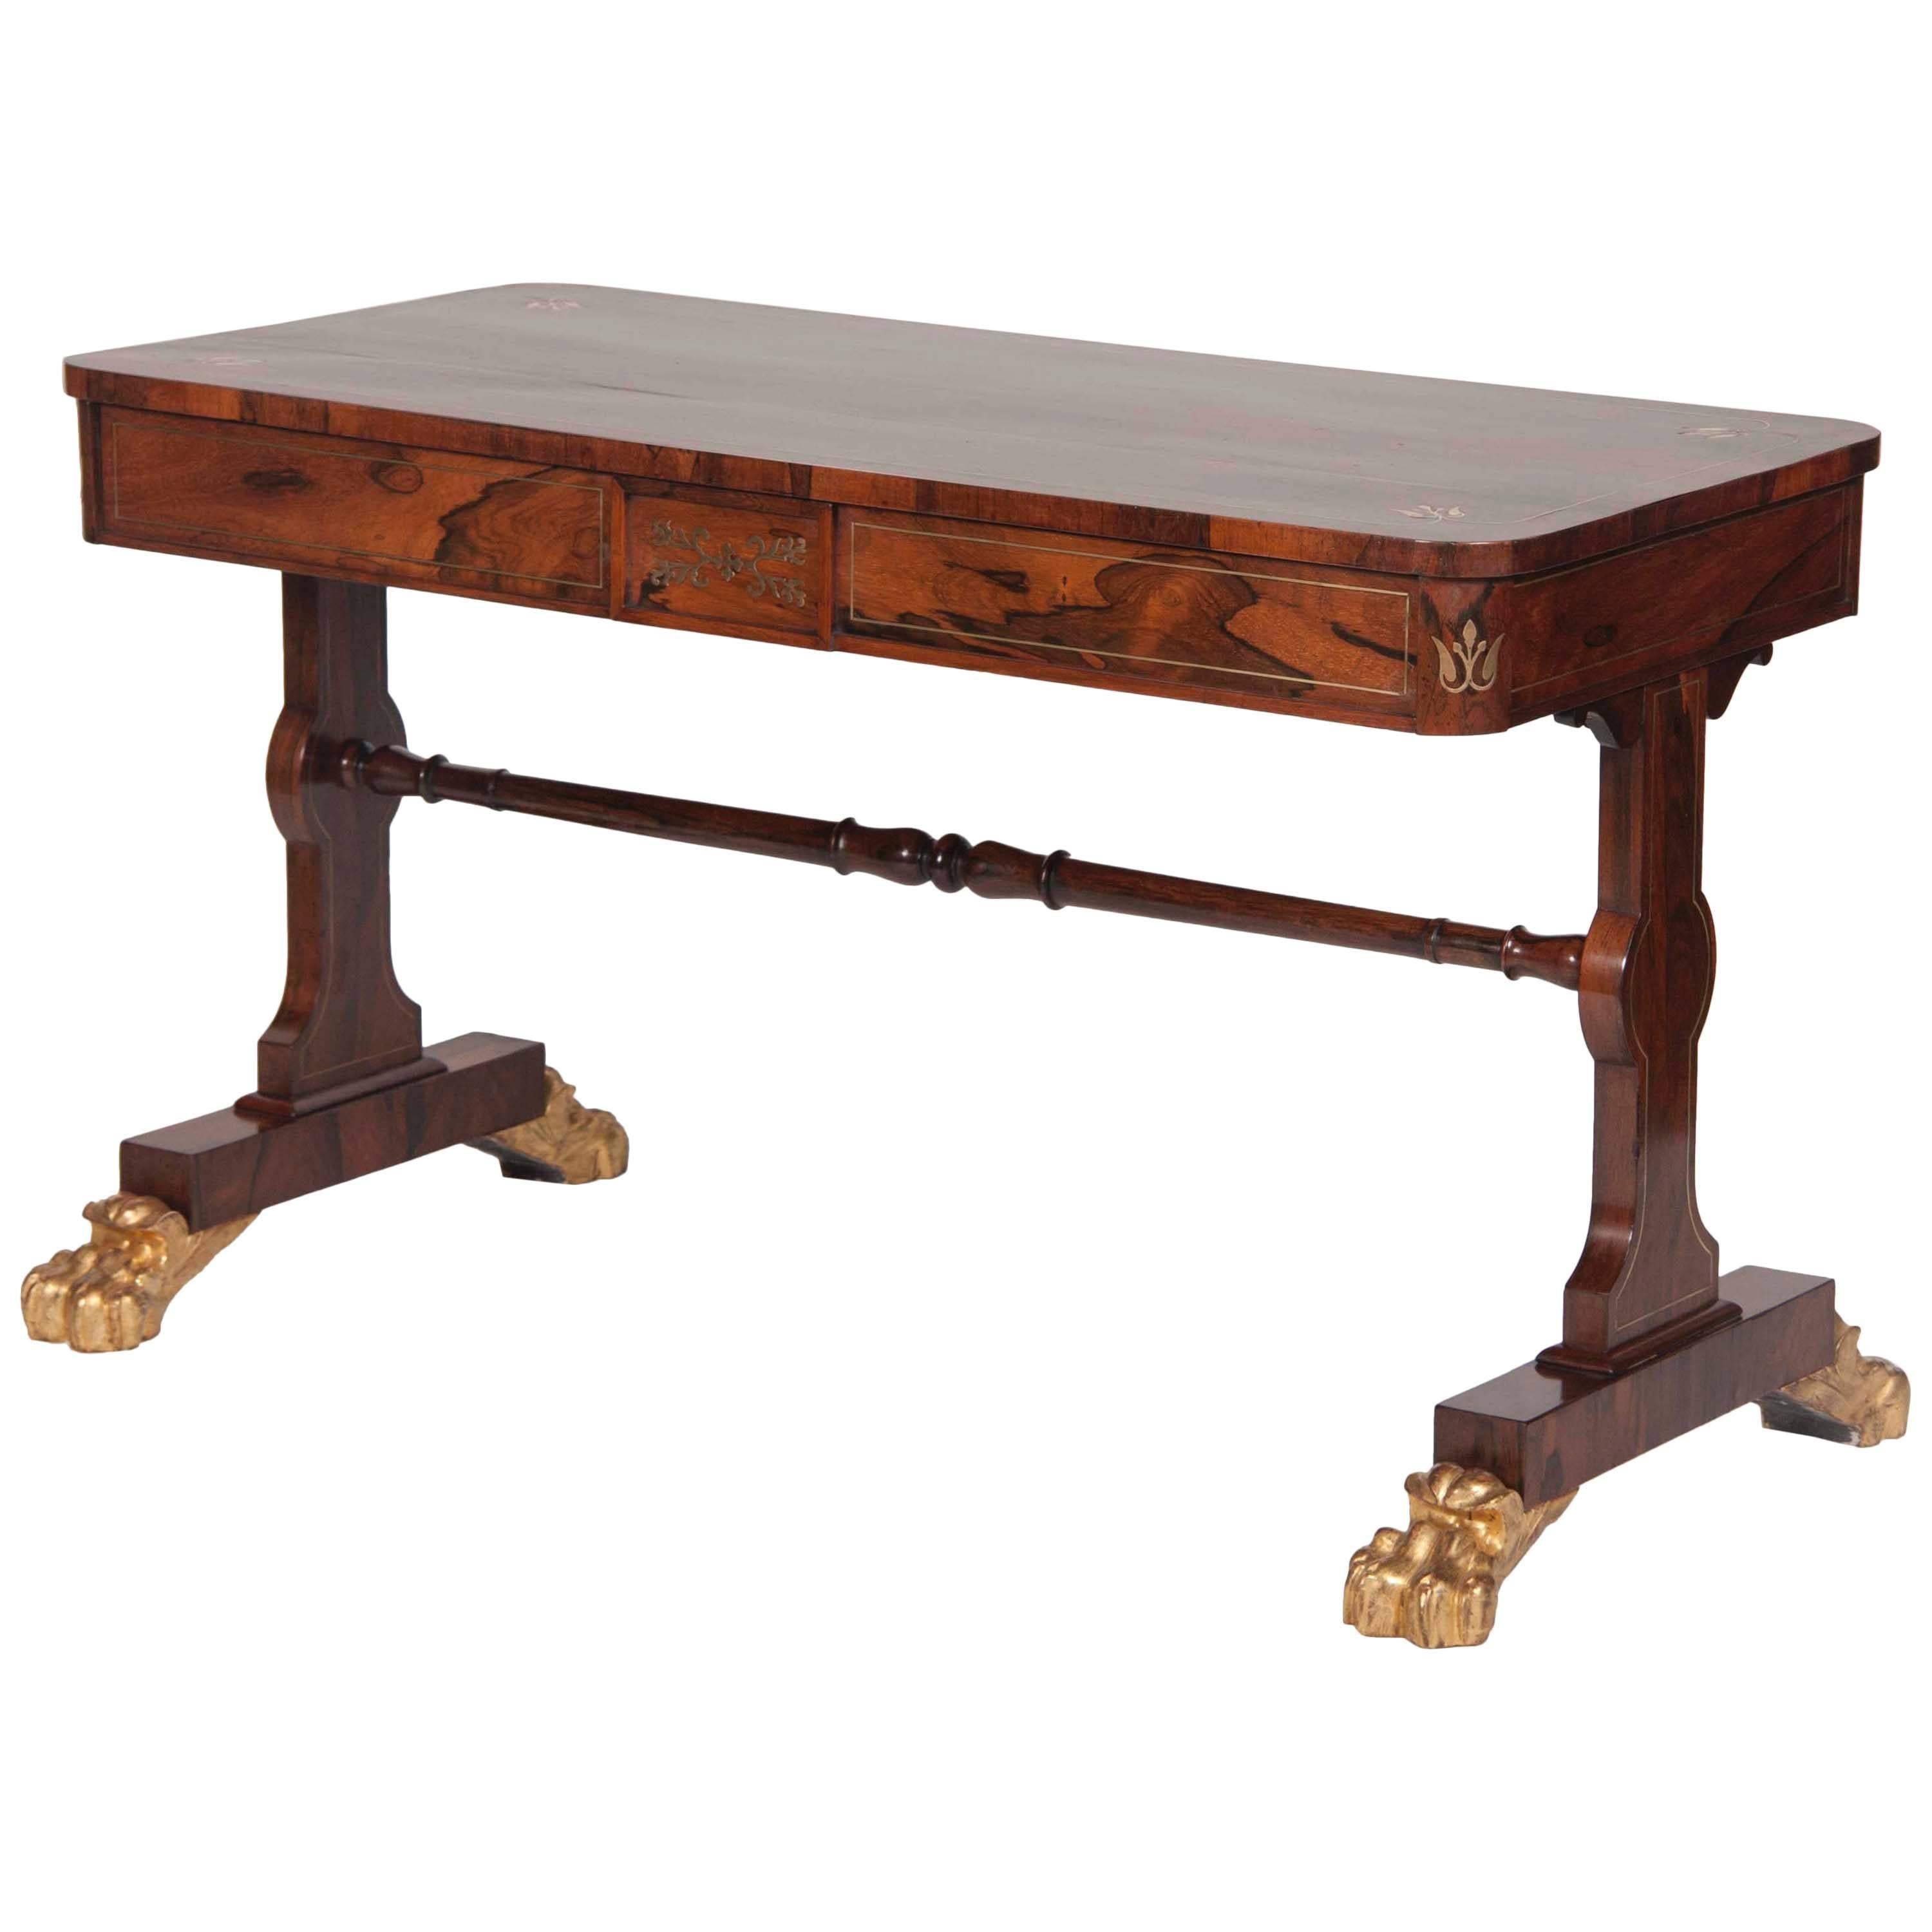 Regency Rosewood and Parcel-Gilt Library Table